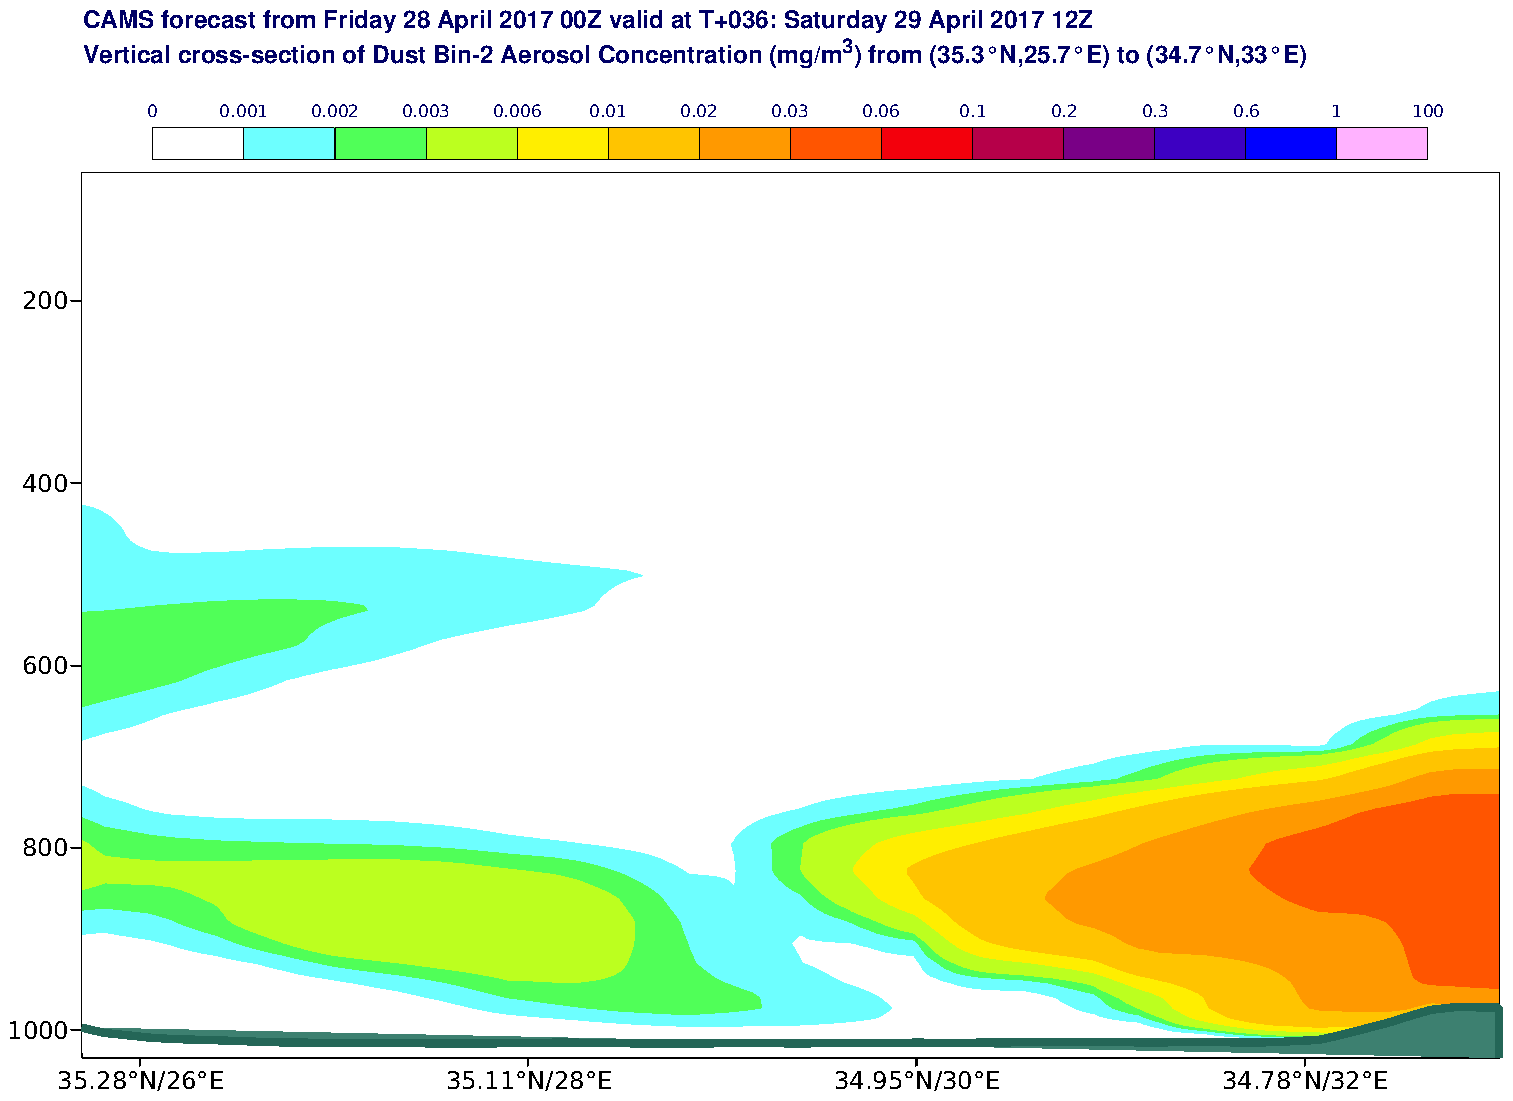 Vertical cross-section of Dust Bin-2 Aerosol Concentration (mg/m3) valid at T36 - 2017-04-29 12:00